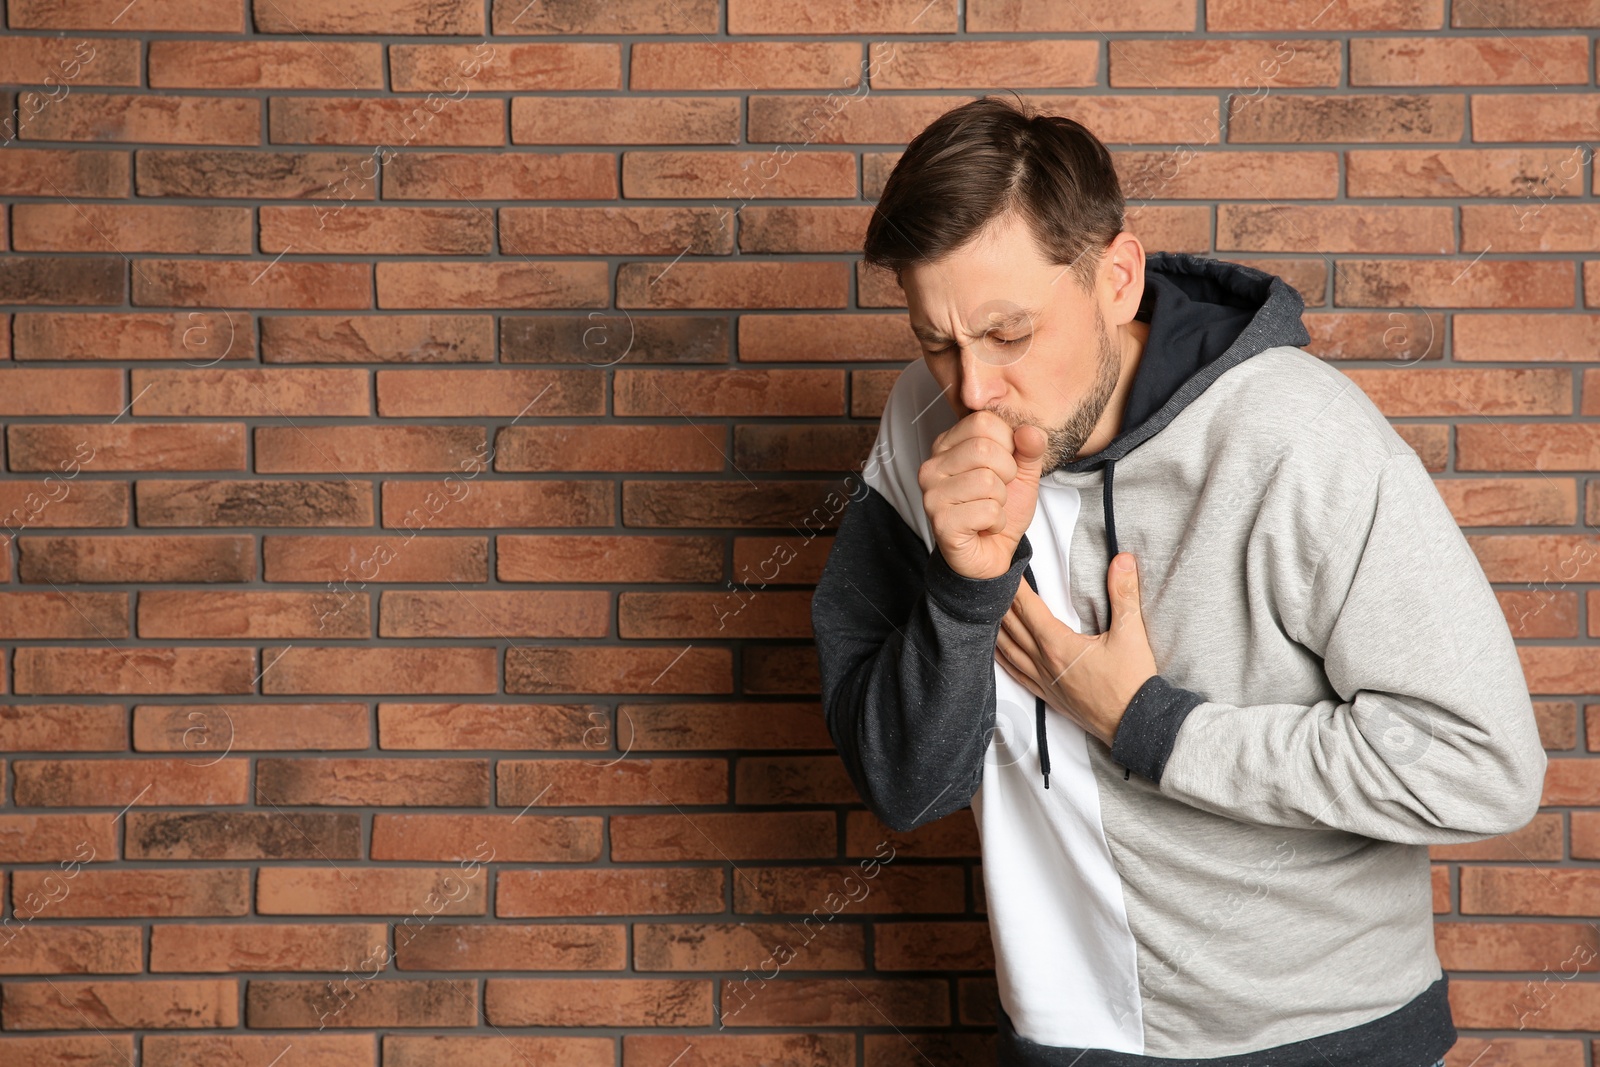 Photo of Man suffering from cough near brick wall. Space for text